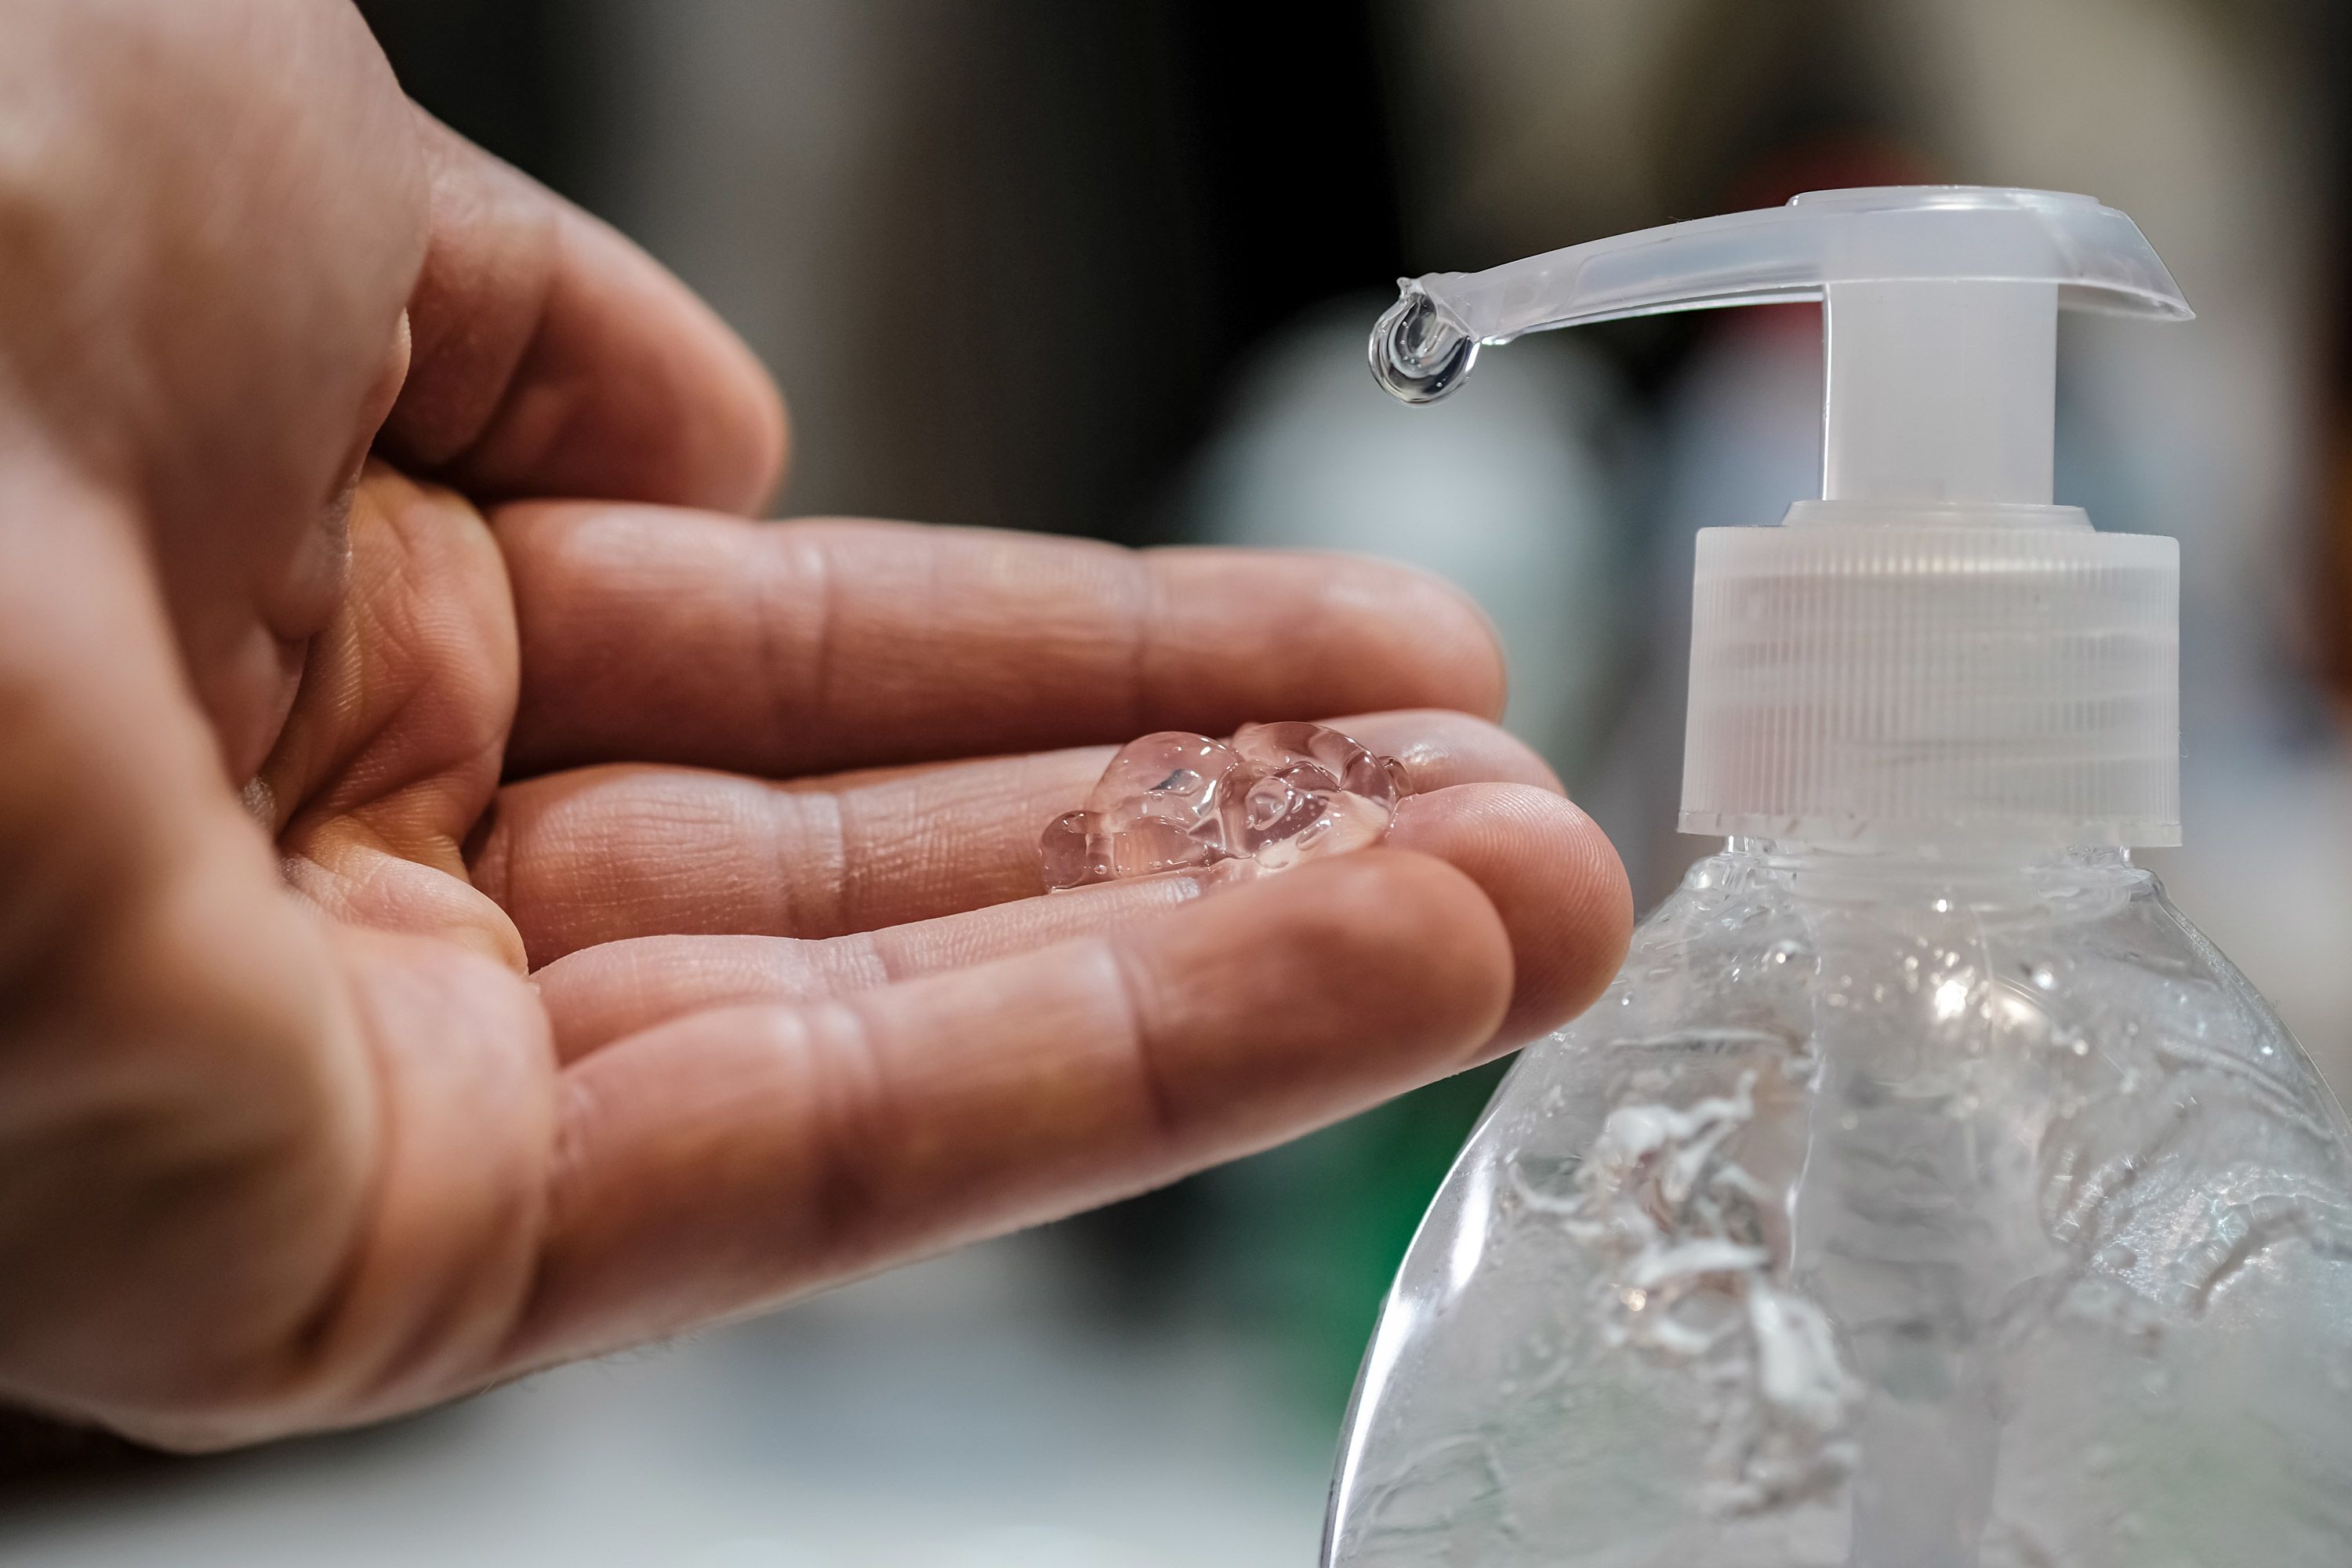 People are dying after drinking hand sanitizer, CDC says | CNN